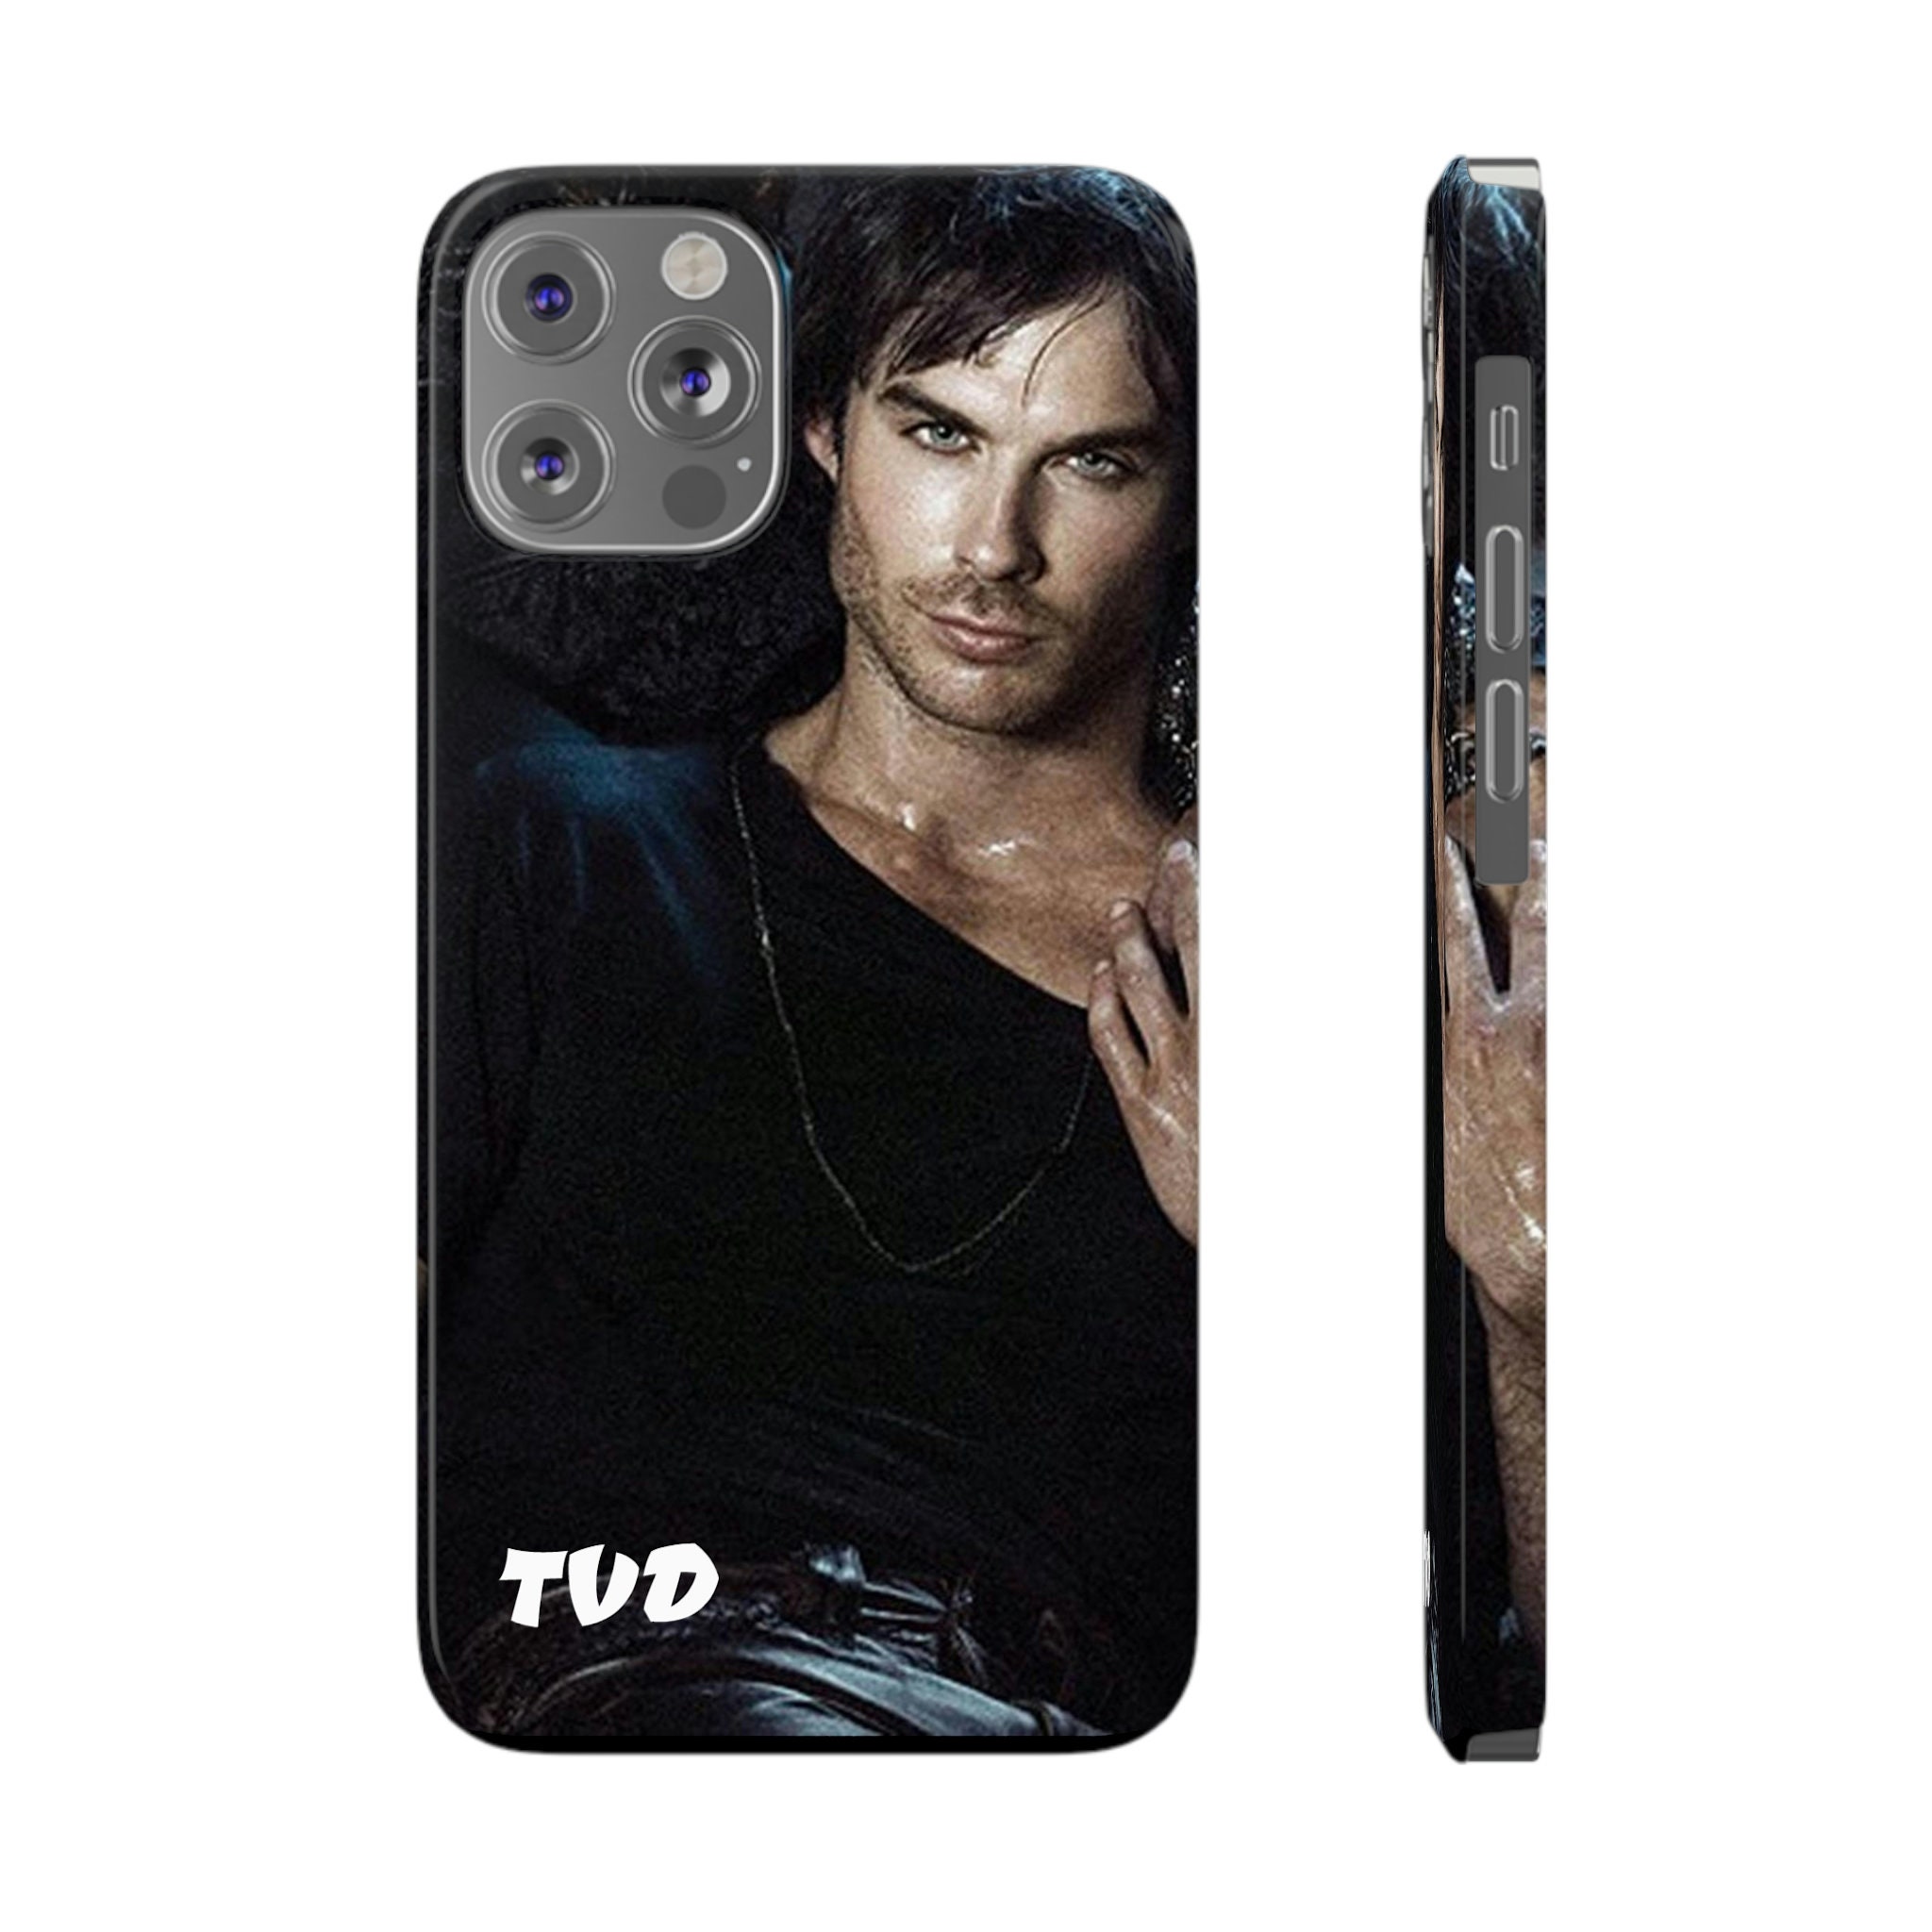 Damon Salvatore/tvd/the Vampire Diaries/iphone and Samsung Cases/christmas  and Birthday Presents/mom/wife -  UK